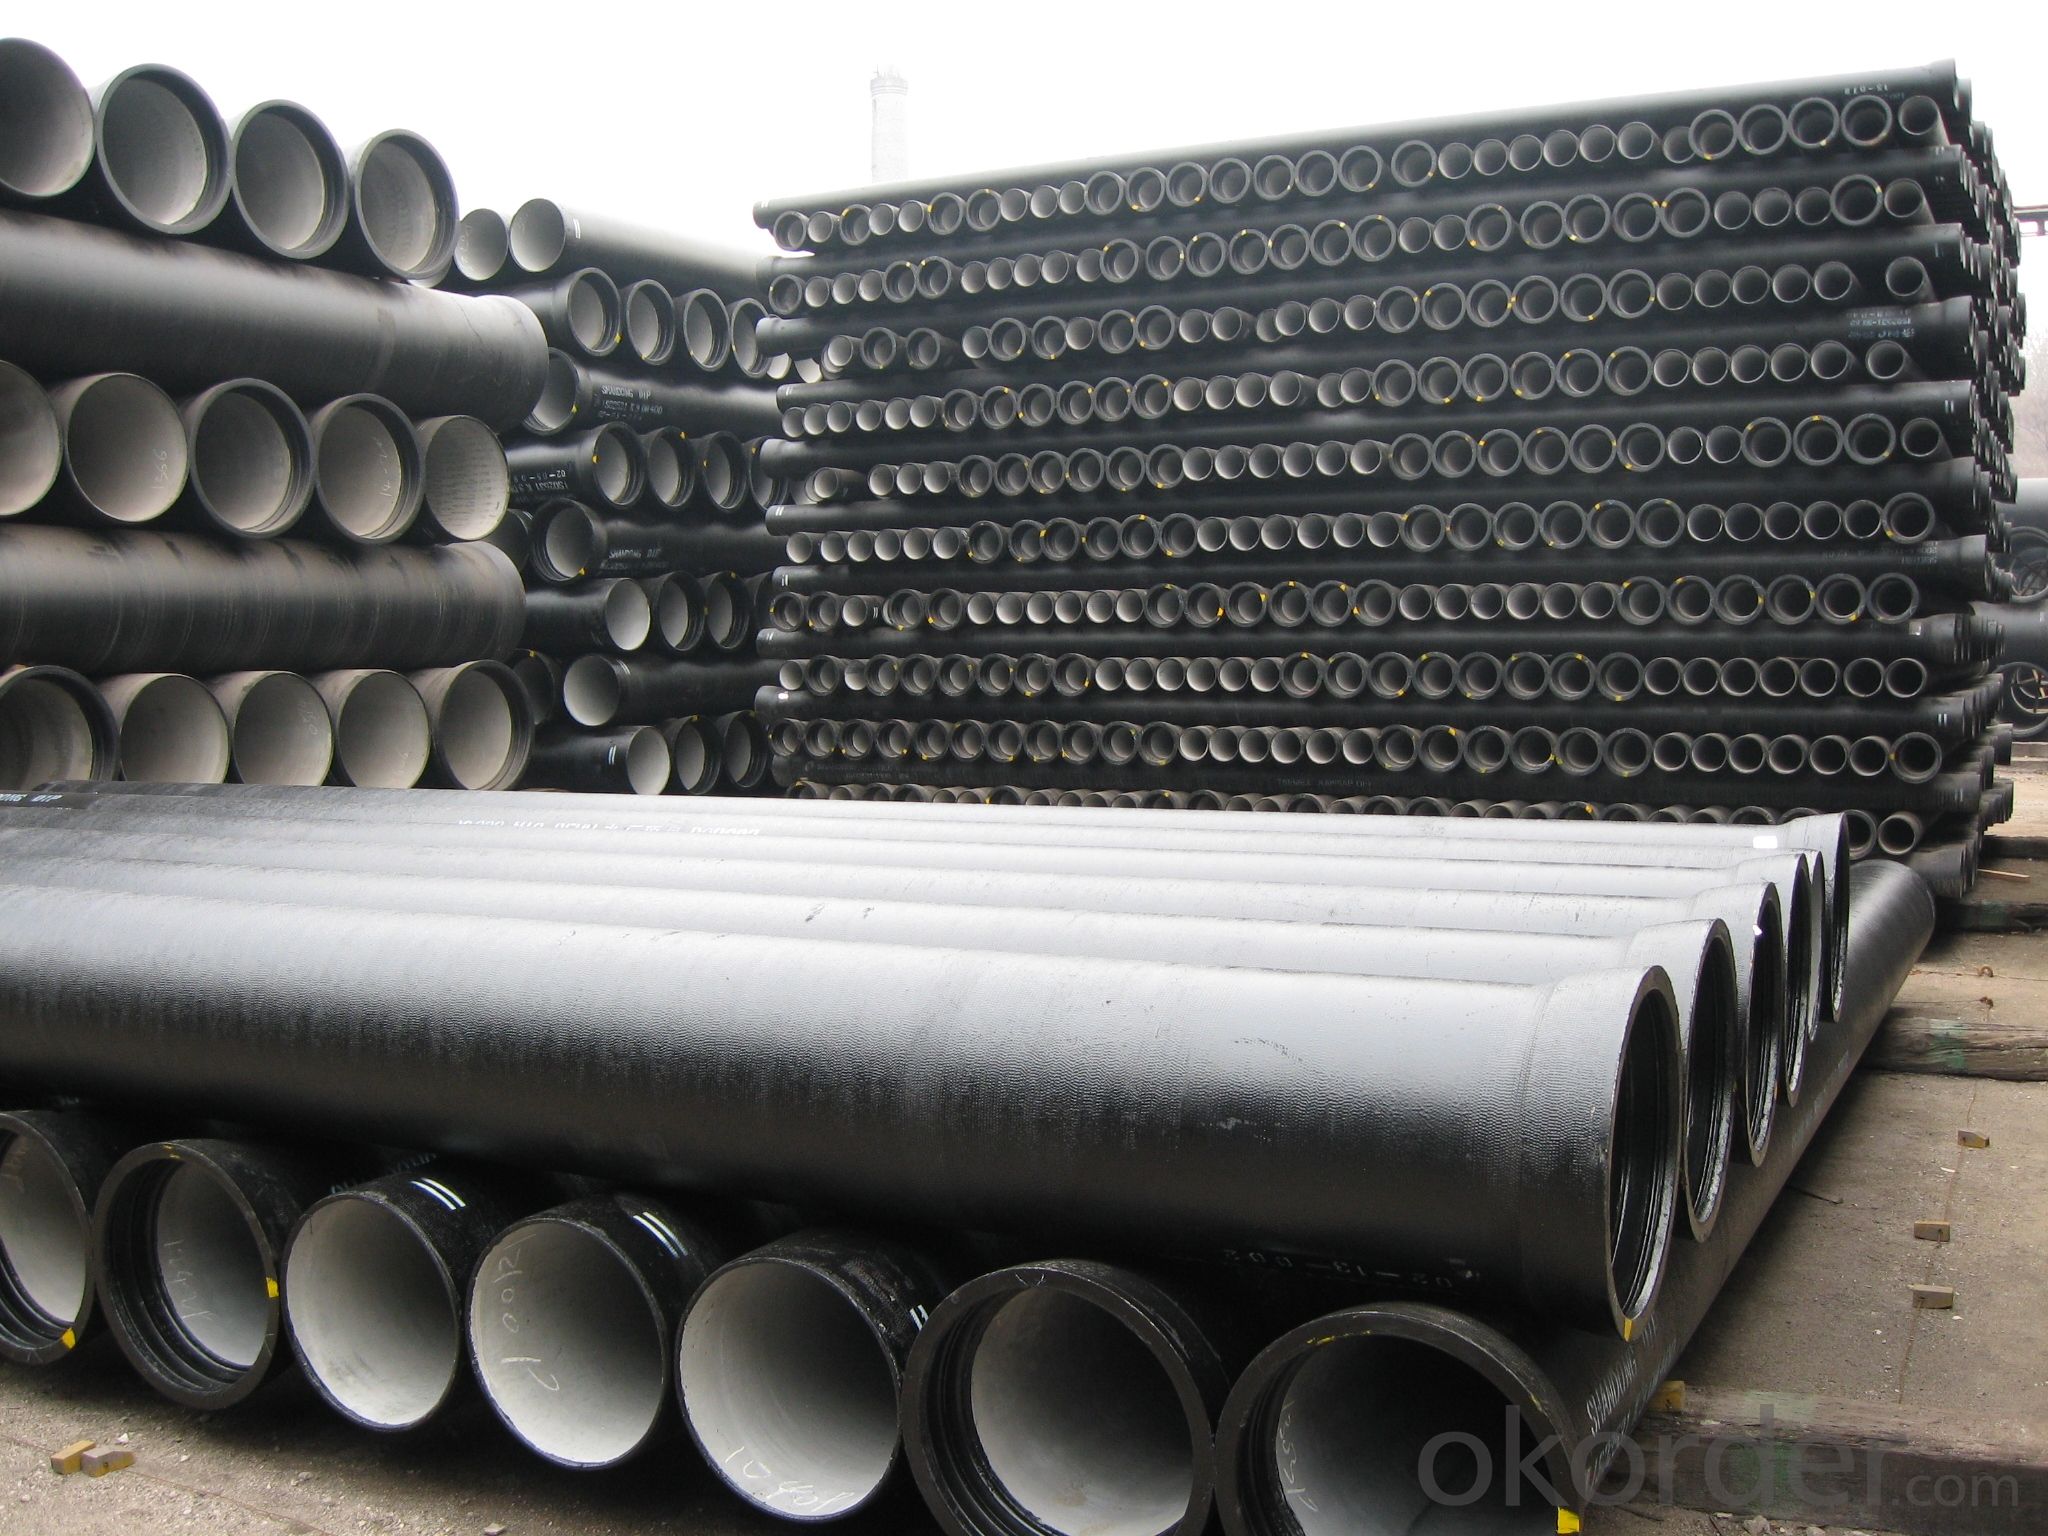 Ductile Iron Pipe DN1000 real-time quotes, last-sale prices -Okorder.com